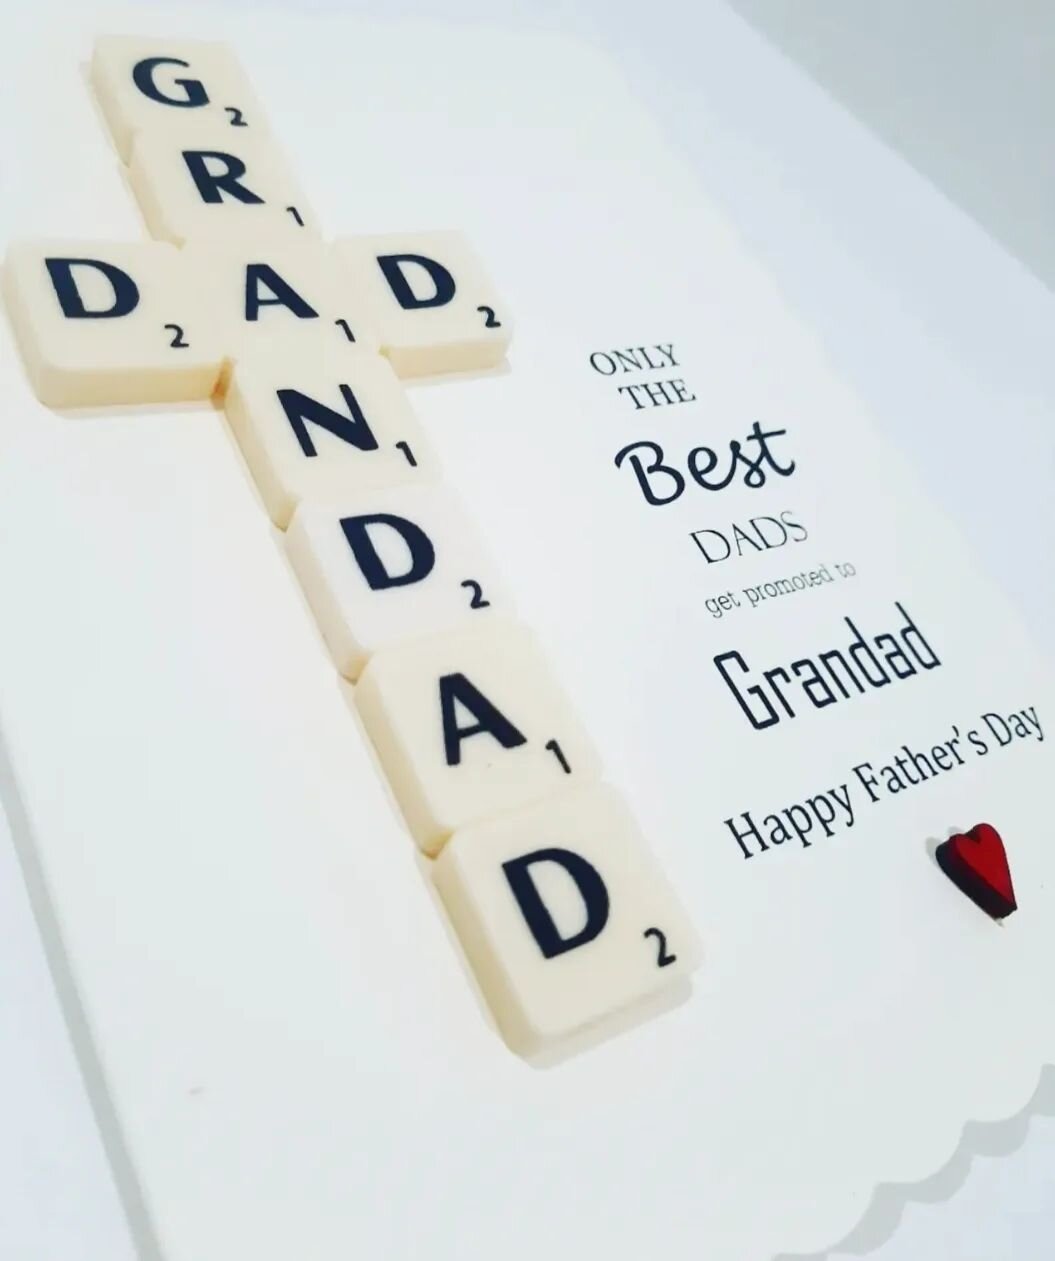 It's an honour to have our Dad's meet and teach our little ones. ❤ 

Personalise yours. 

&pound;5.95

#fathersday #fathersdaygifts #dad #happyfathersday #love #father #family #mothersday #daddy #fathers #giftideas #fatherhood #fathersdaygiftideas #b